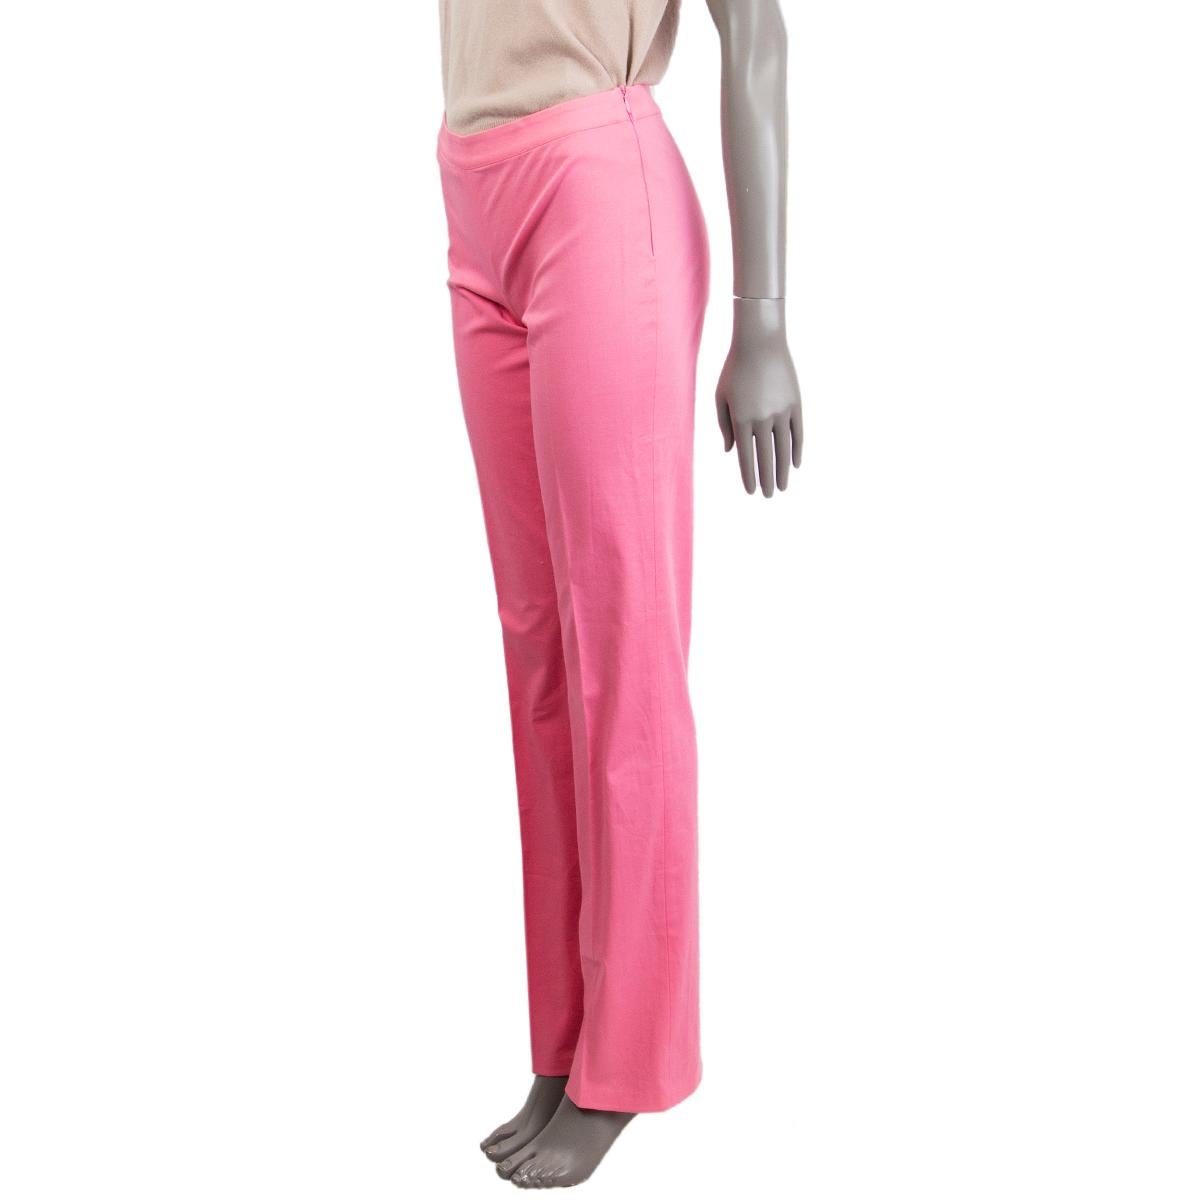 100% authentic Blumarine straight pants in flamingo cotton (96%) spandex (4%) with a straight leg, mid-rise and closes with a concealed zipper on the left side. Unlined. Has been worn and is in excellent condition.

Measurements
Tag